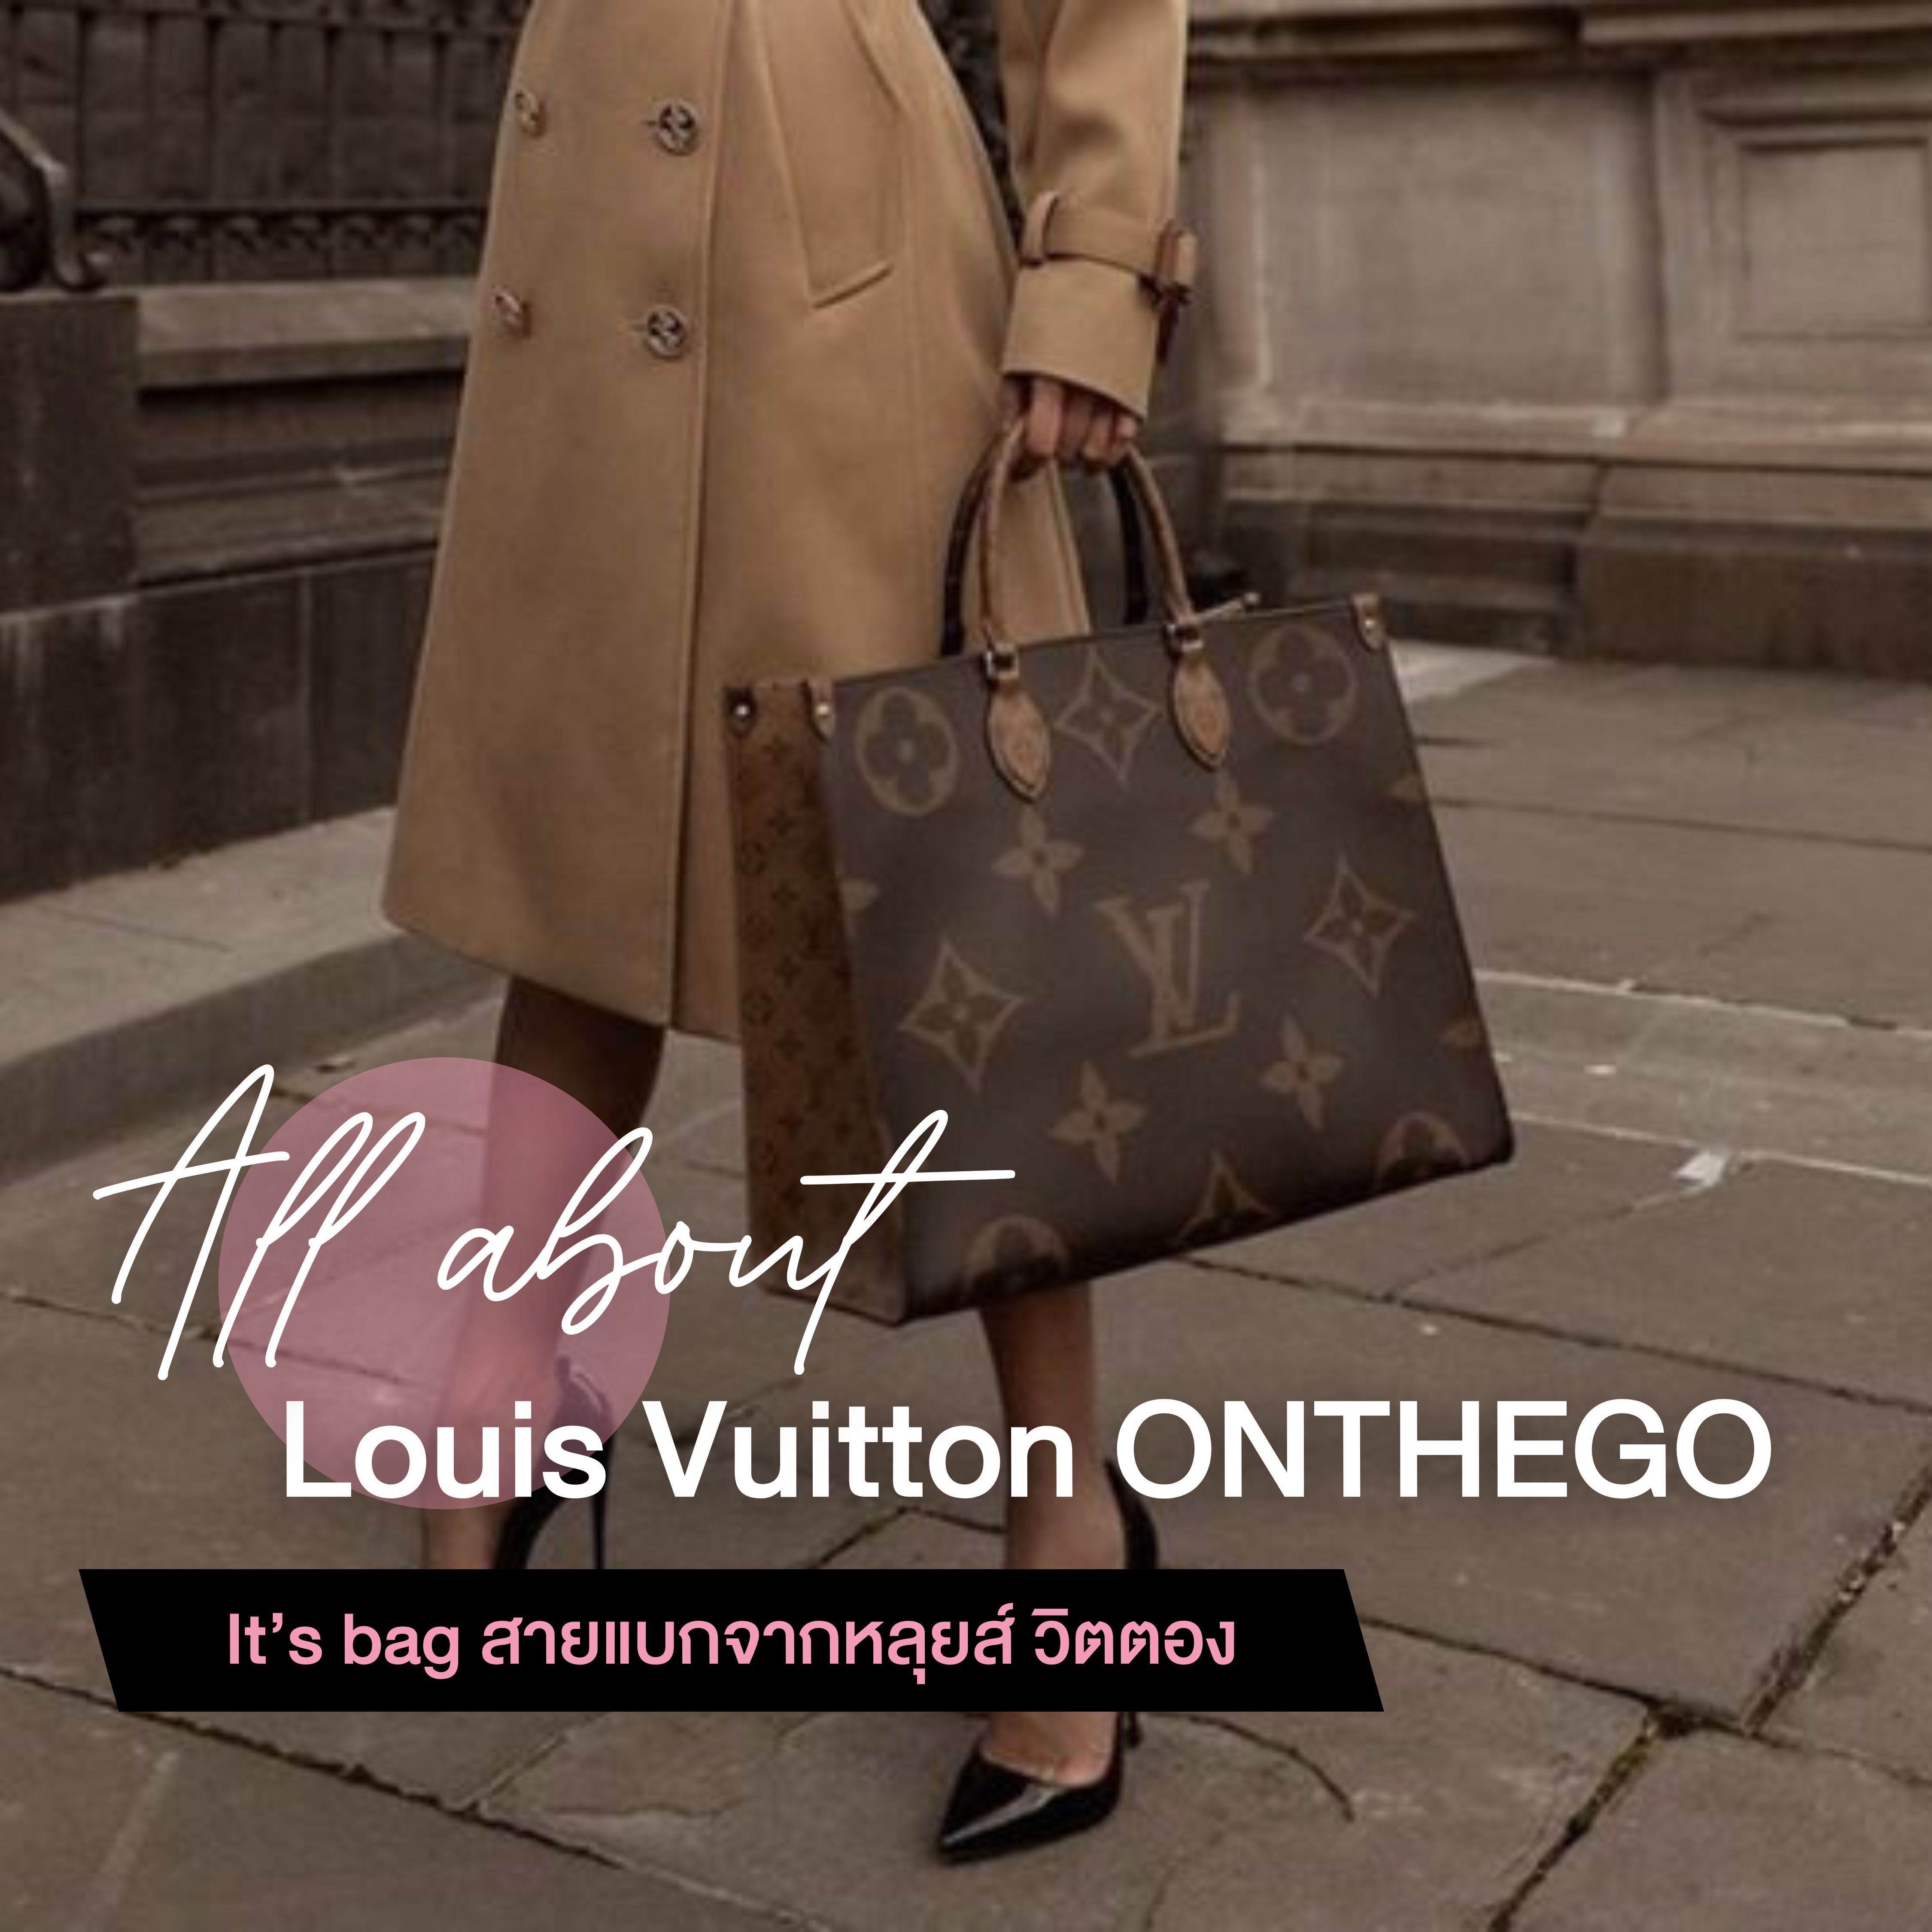 All About Louis Vuitton ONTHEGO